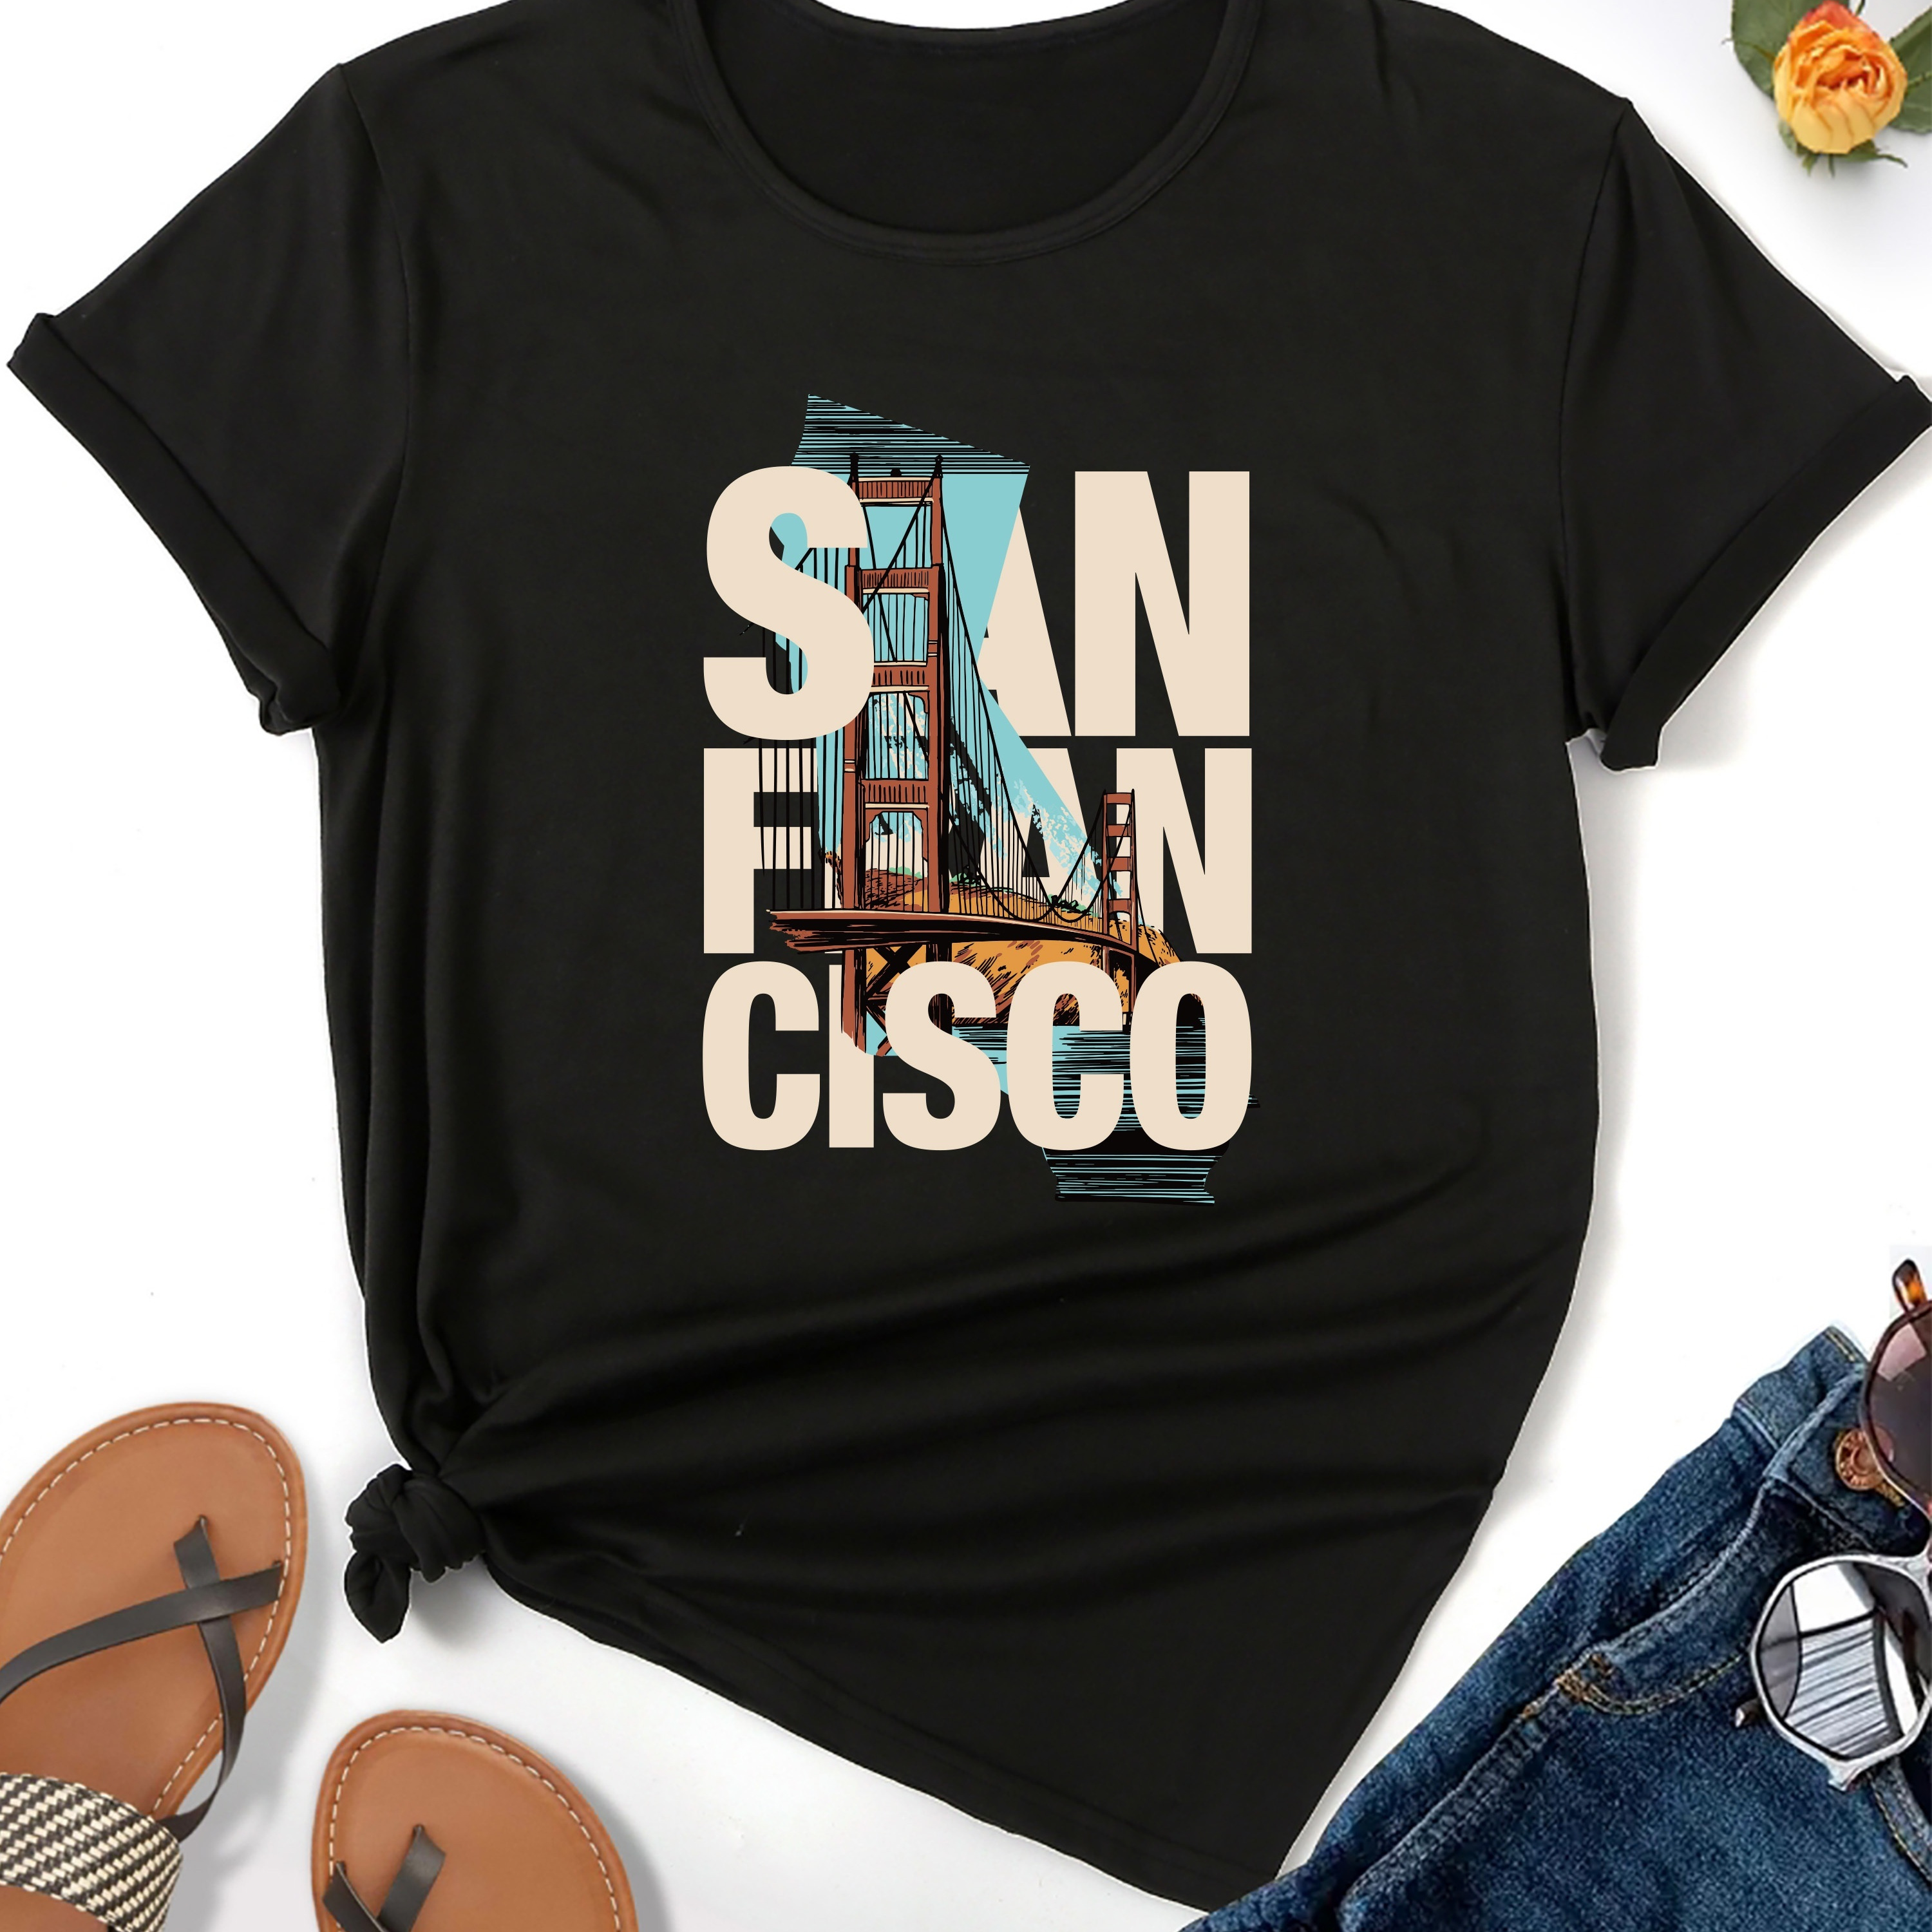 

San Francisco Print T-shirt, Casual Crew Neck Short Sleeve Top For Spring & Summer, Women's Clothing